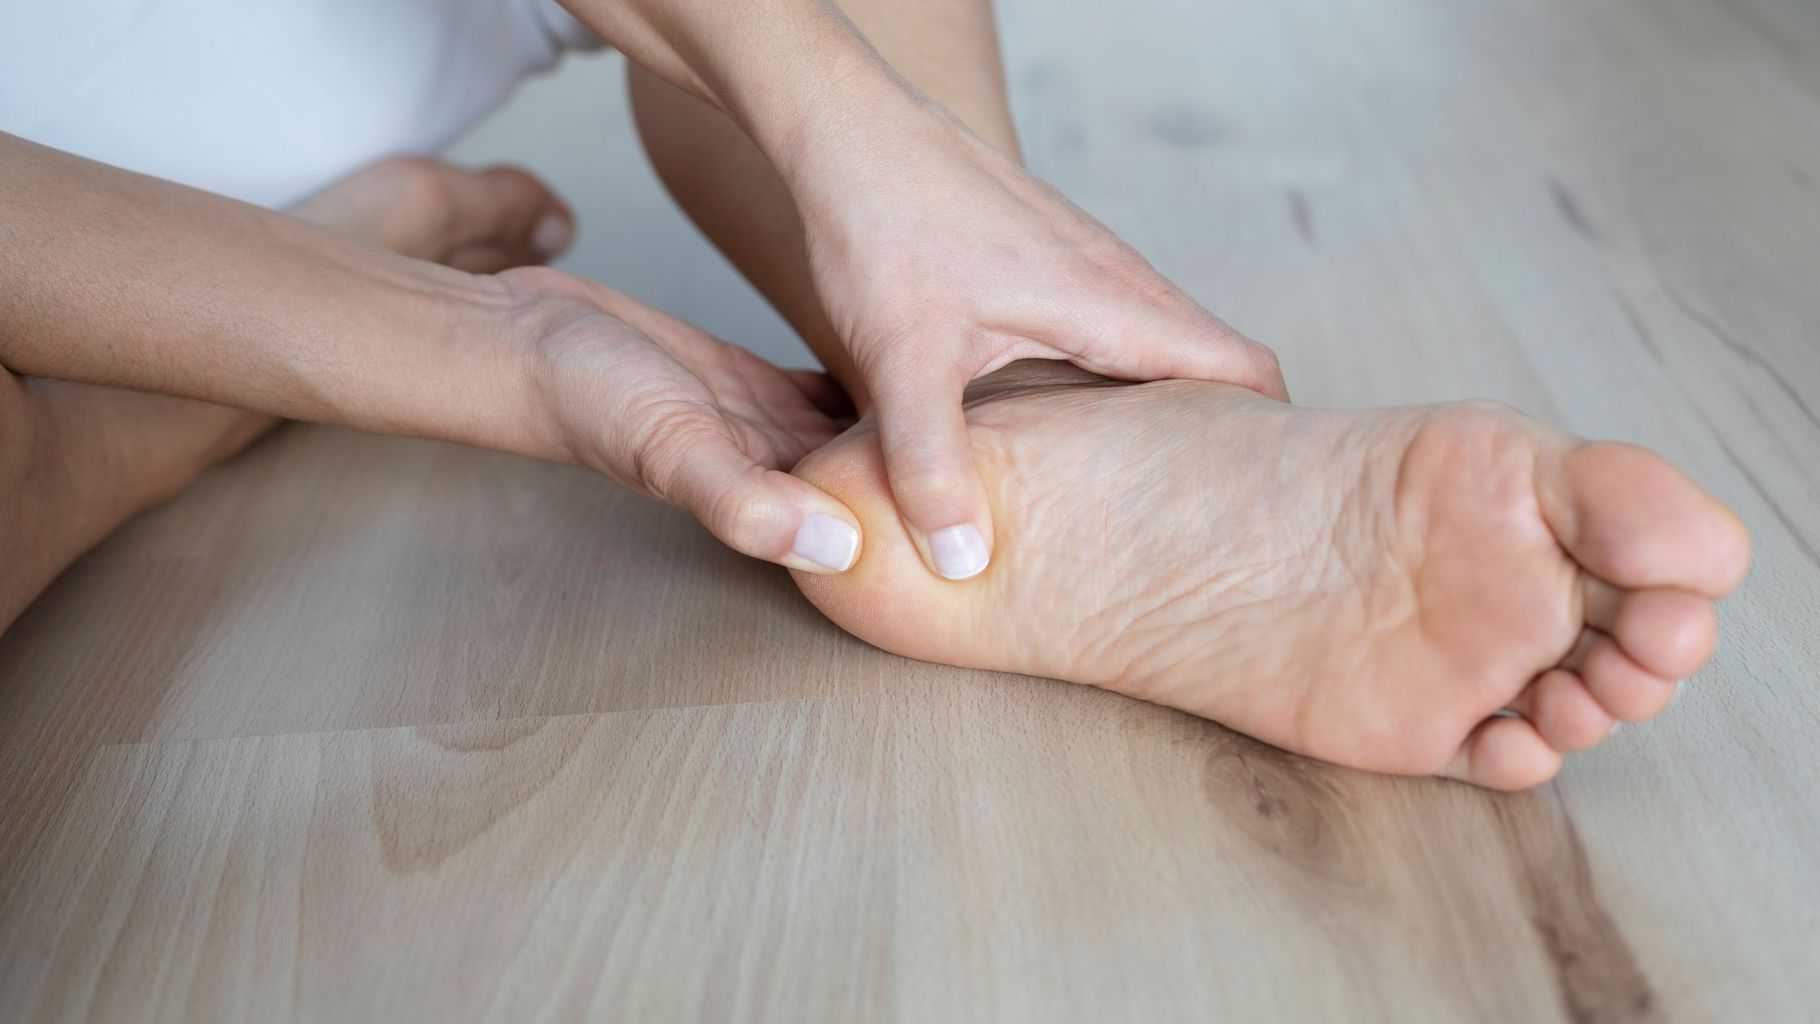 How To Get Rid Of Plantar Fasciitis Pain | Joint Replacement Institute